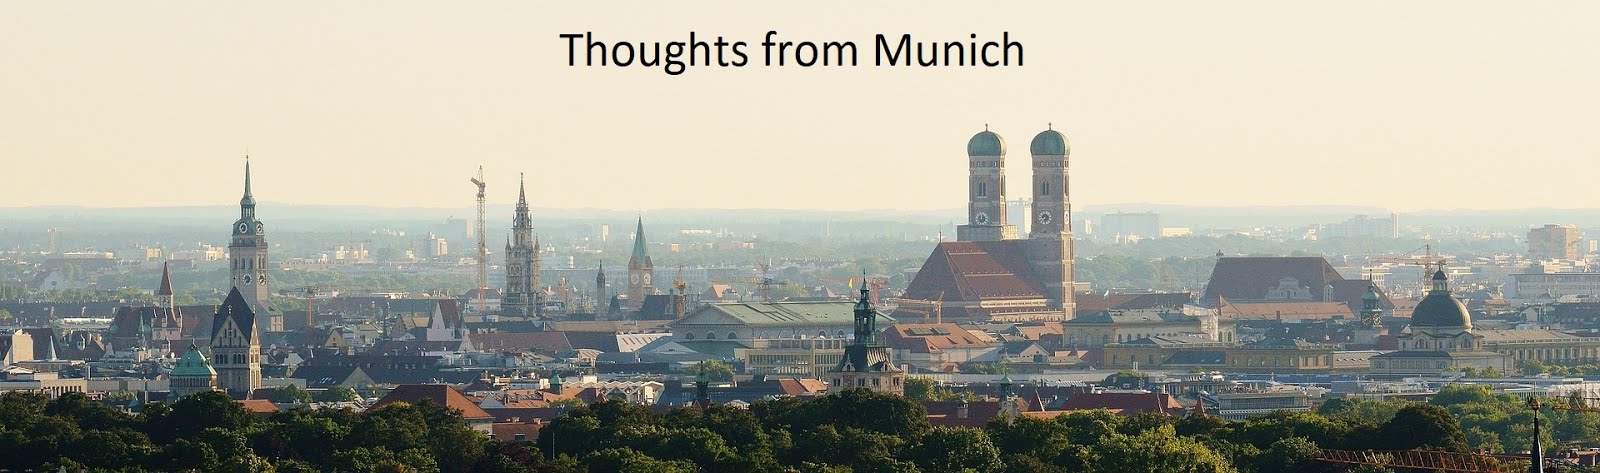 Thoughts from Munich